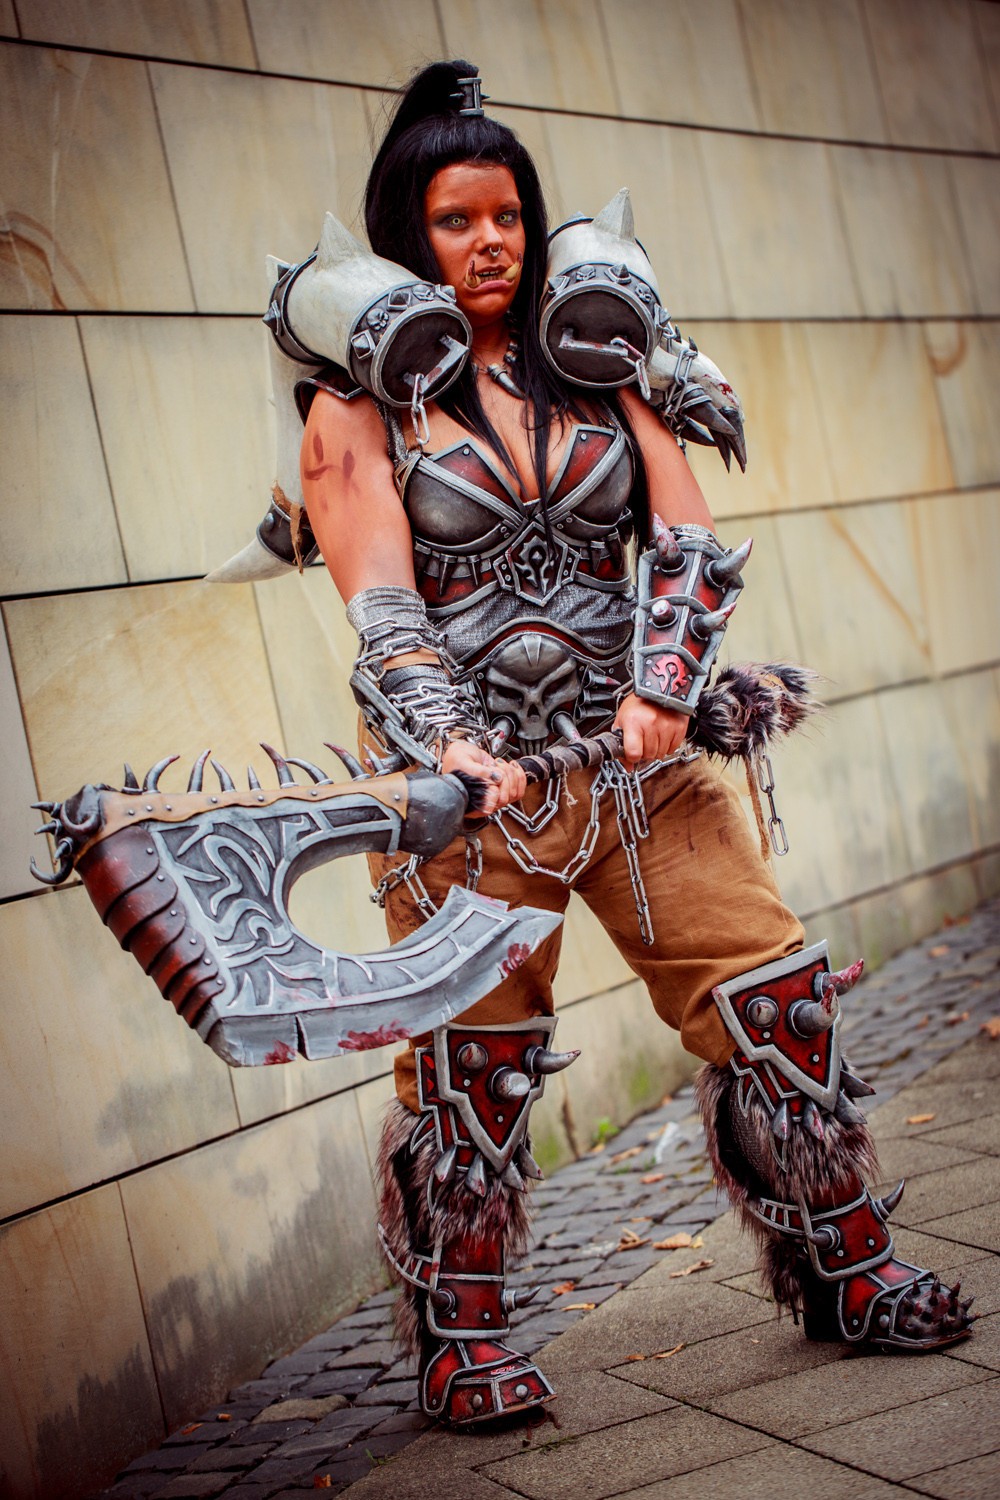 World of warcraft cosplay costumes